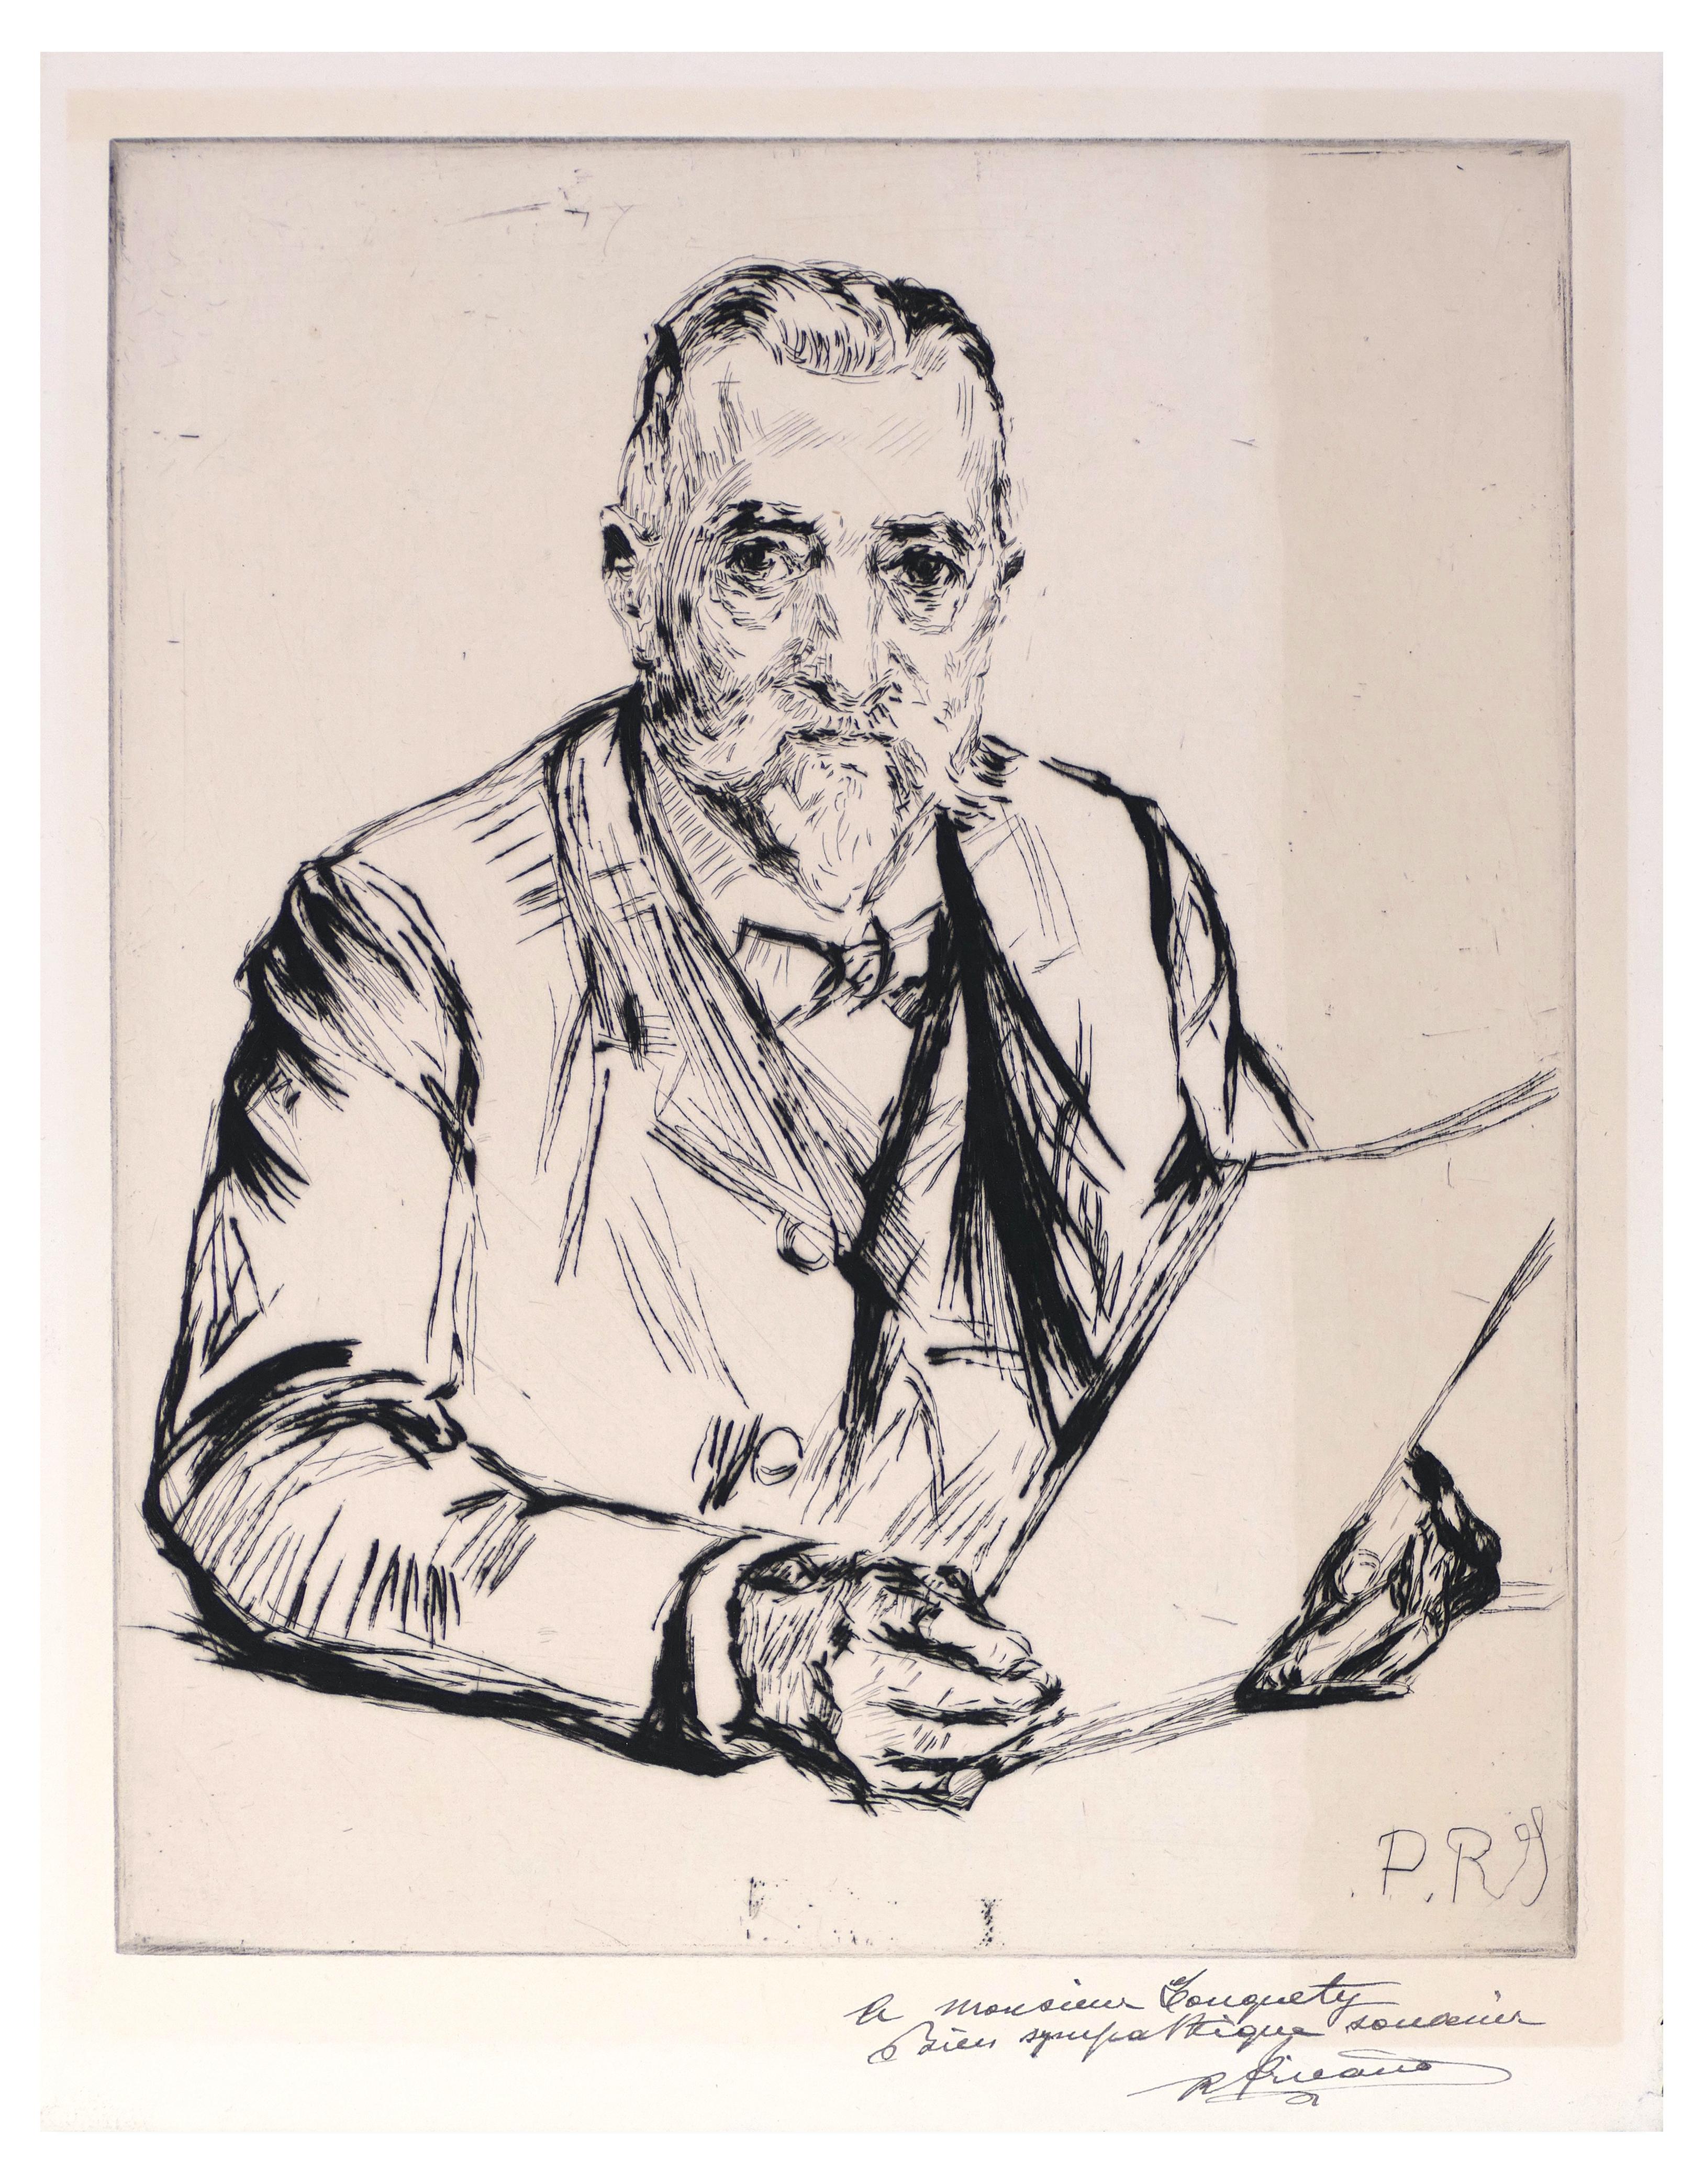 Charles Paul Renouard Portrait Print - Portrait d'un Homme - Etching and Drypoint by C.P. Renouard - Early 1900